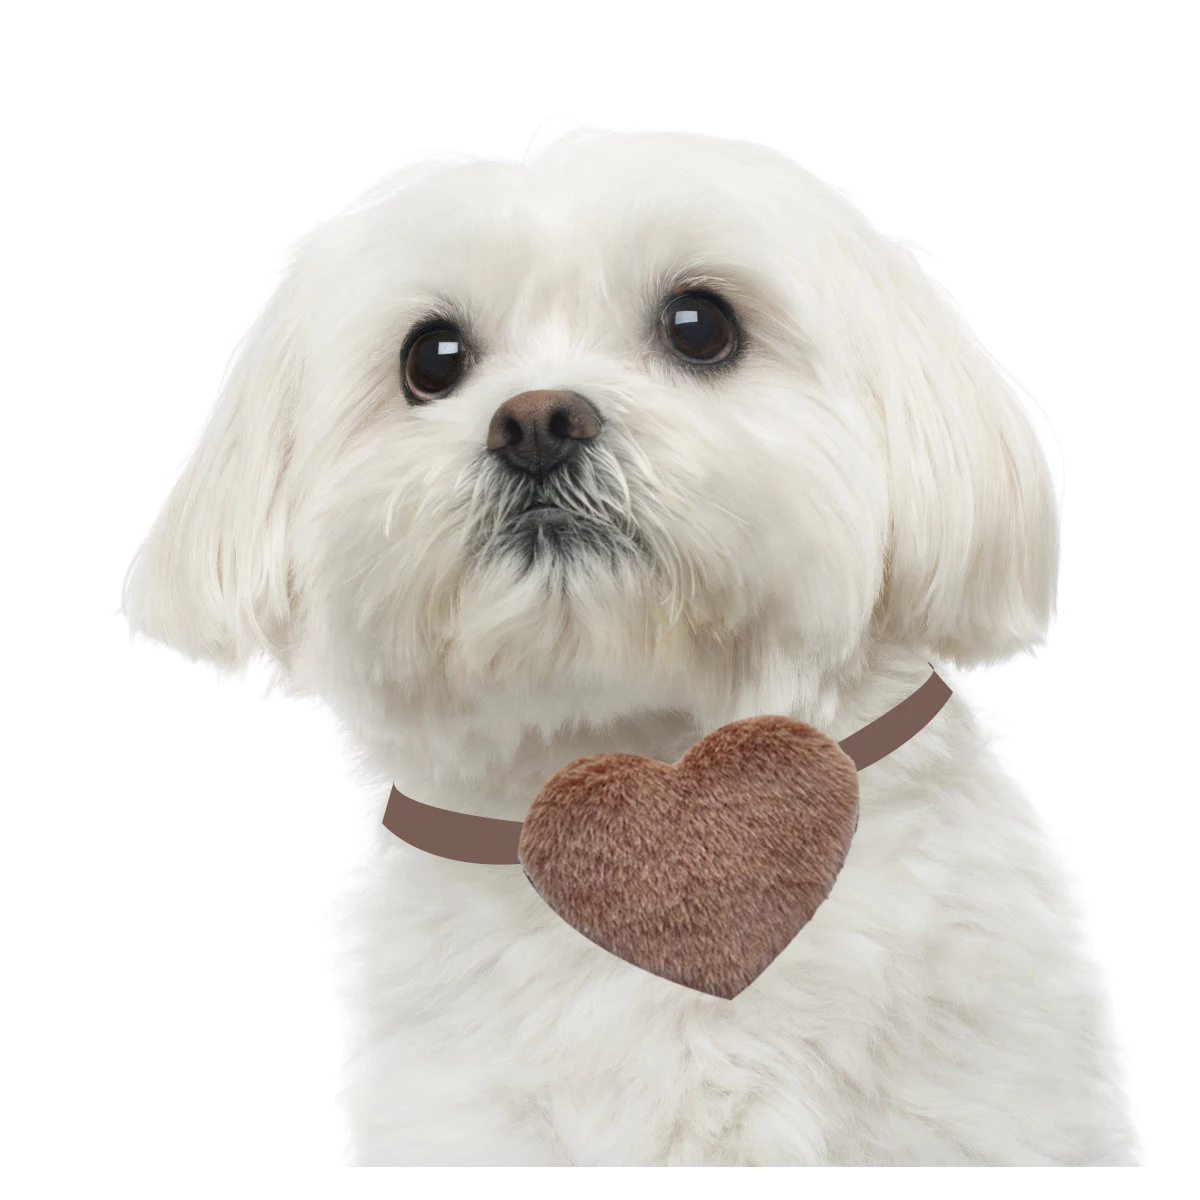 

50/100pcs Small Shape Dog Collars Product Heart Bowties Ties Adjustable Bow Neckties Bowtie Pet Dog Day Grooming Valentine's Dog